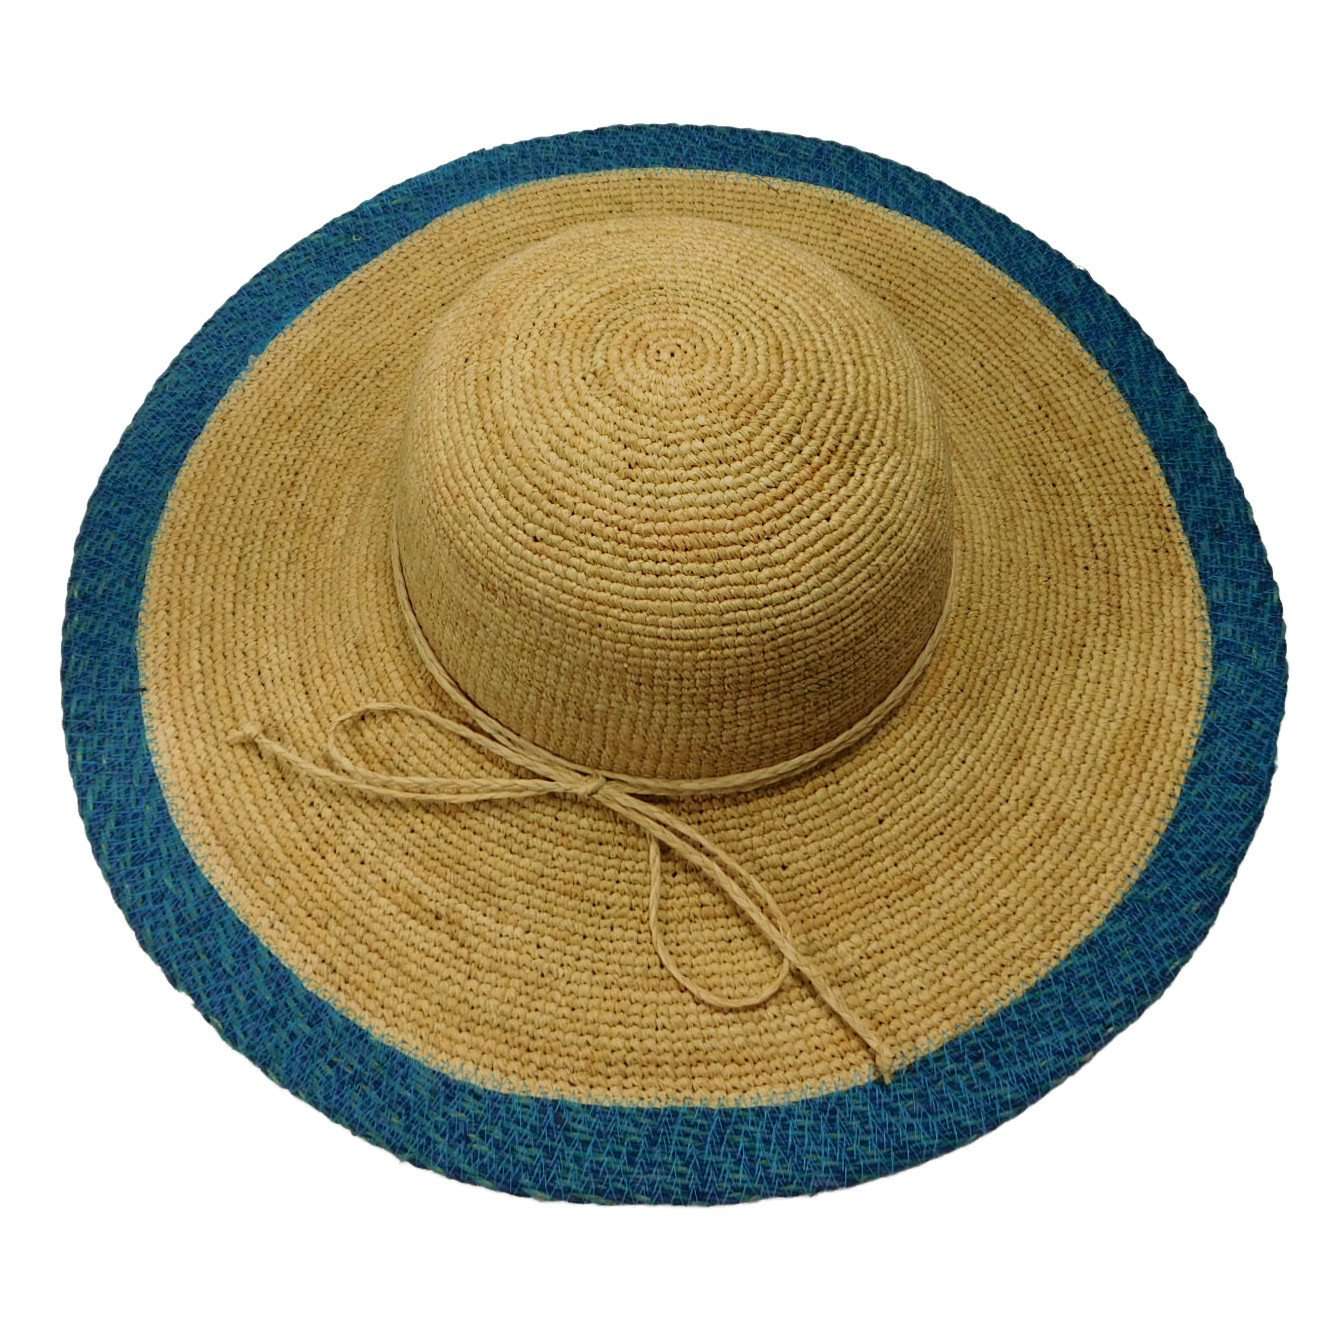 Two Tone Natural Raffia Beach Hat - Sophia Hat Collection Floppy Hat Something Special LA    